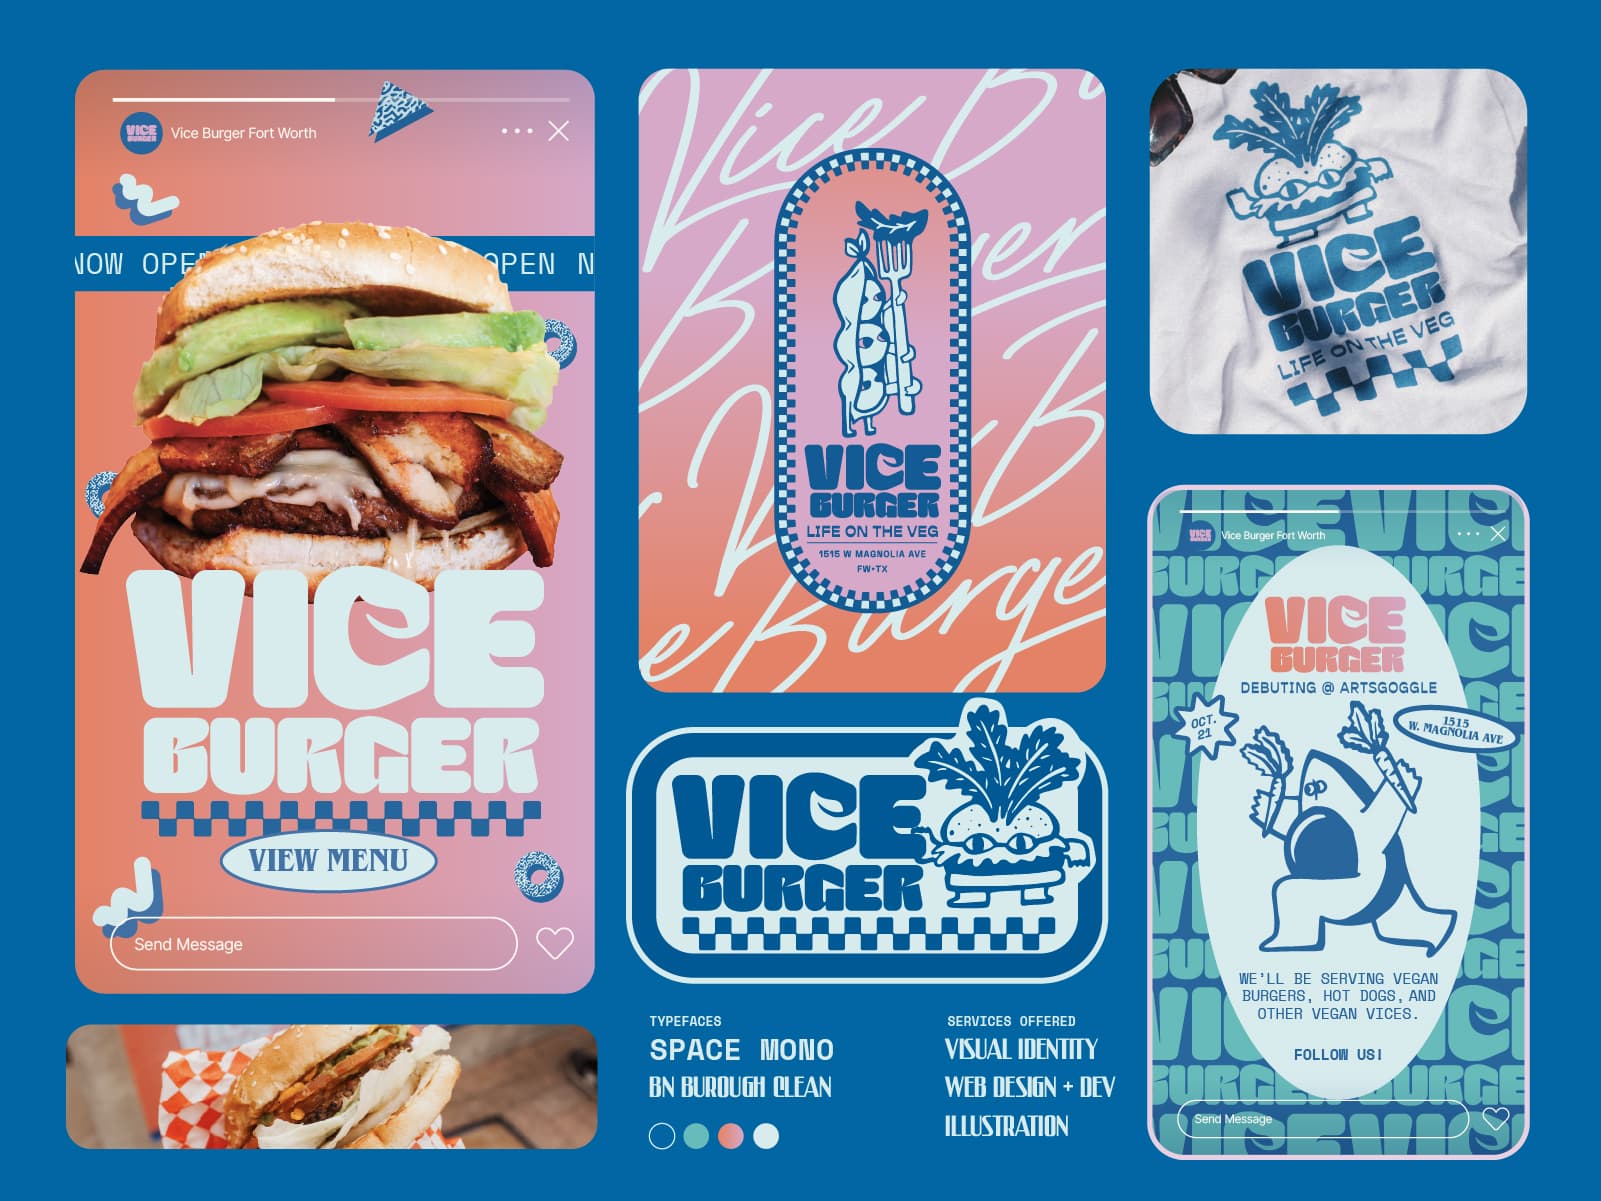 brand specimen for vice burger that includes highlights of the social media campaign, logo, supporting elements, fonts, colors, merchandise, branding and design